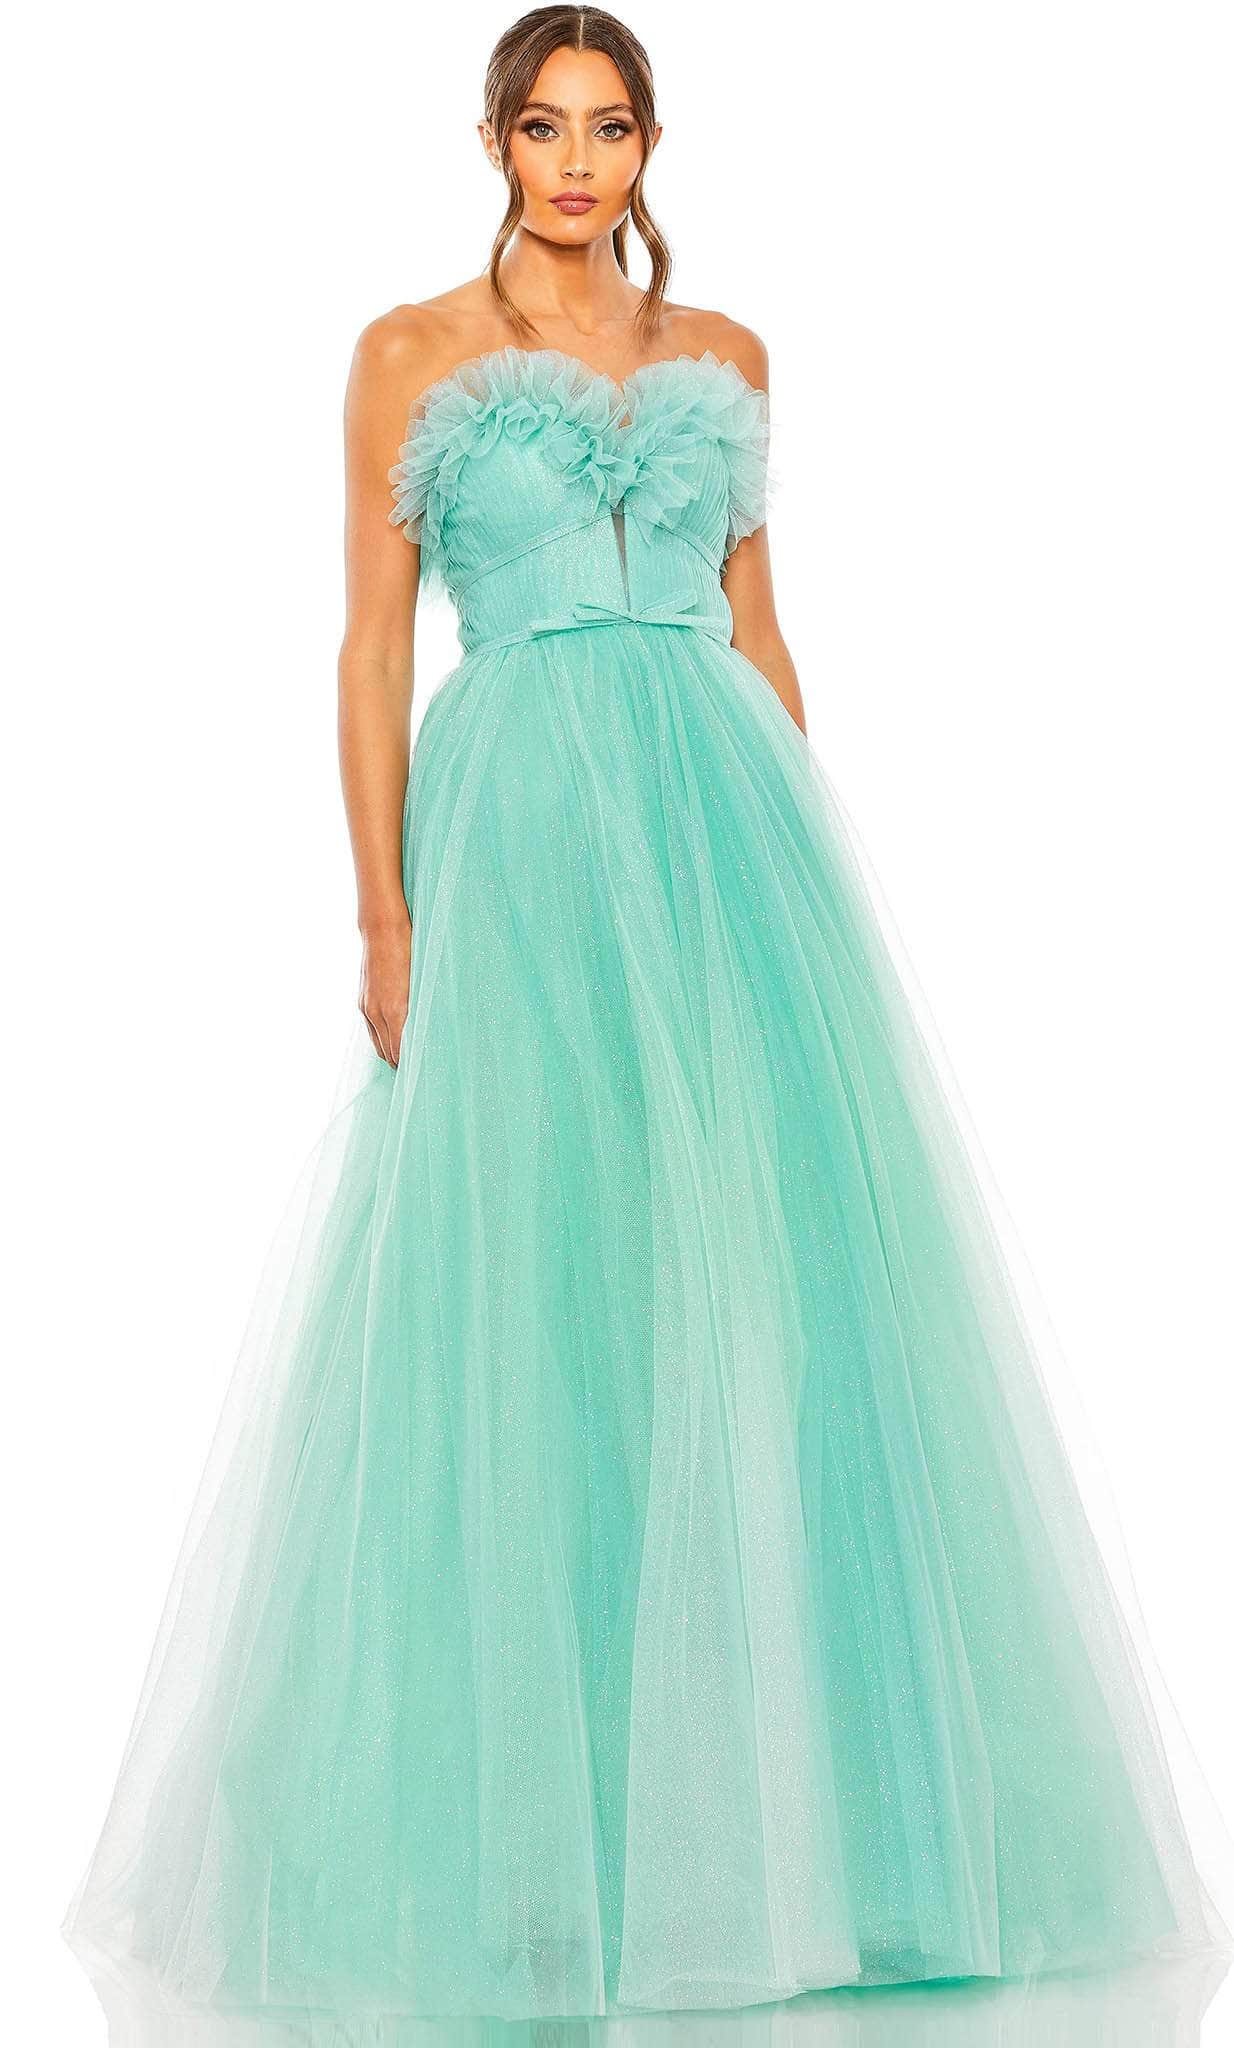 Image of Mac Duggal 20555 - Glitter Tulle Strapless Ballgown